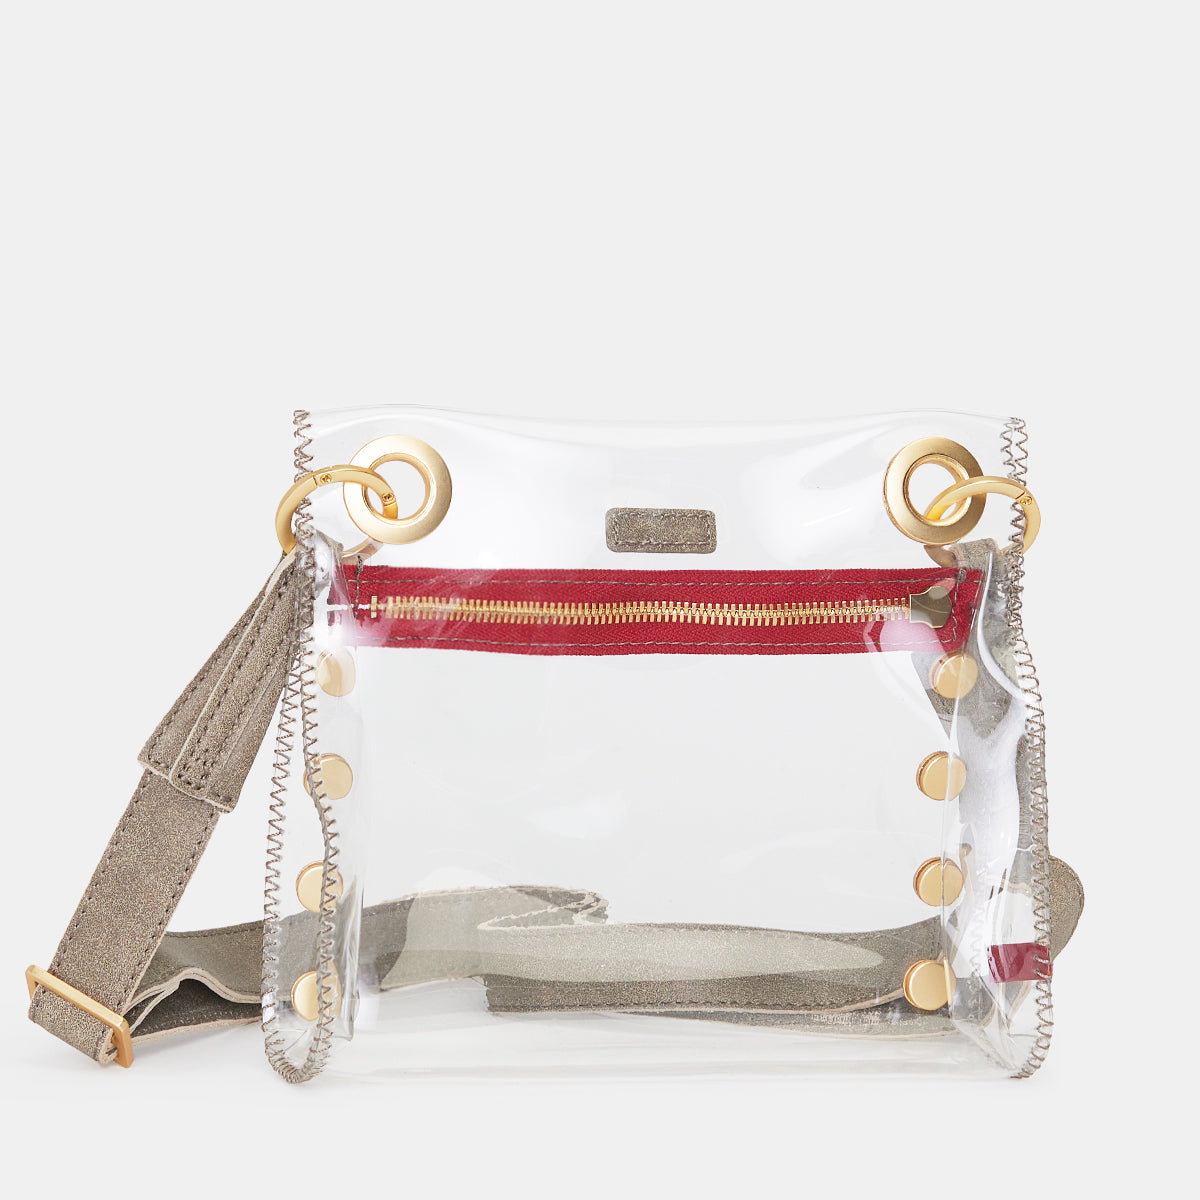 Tony | Clear Pew/Brushed Gold Red Zip | Sml